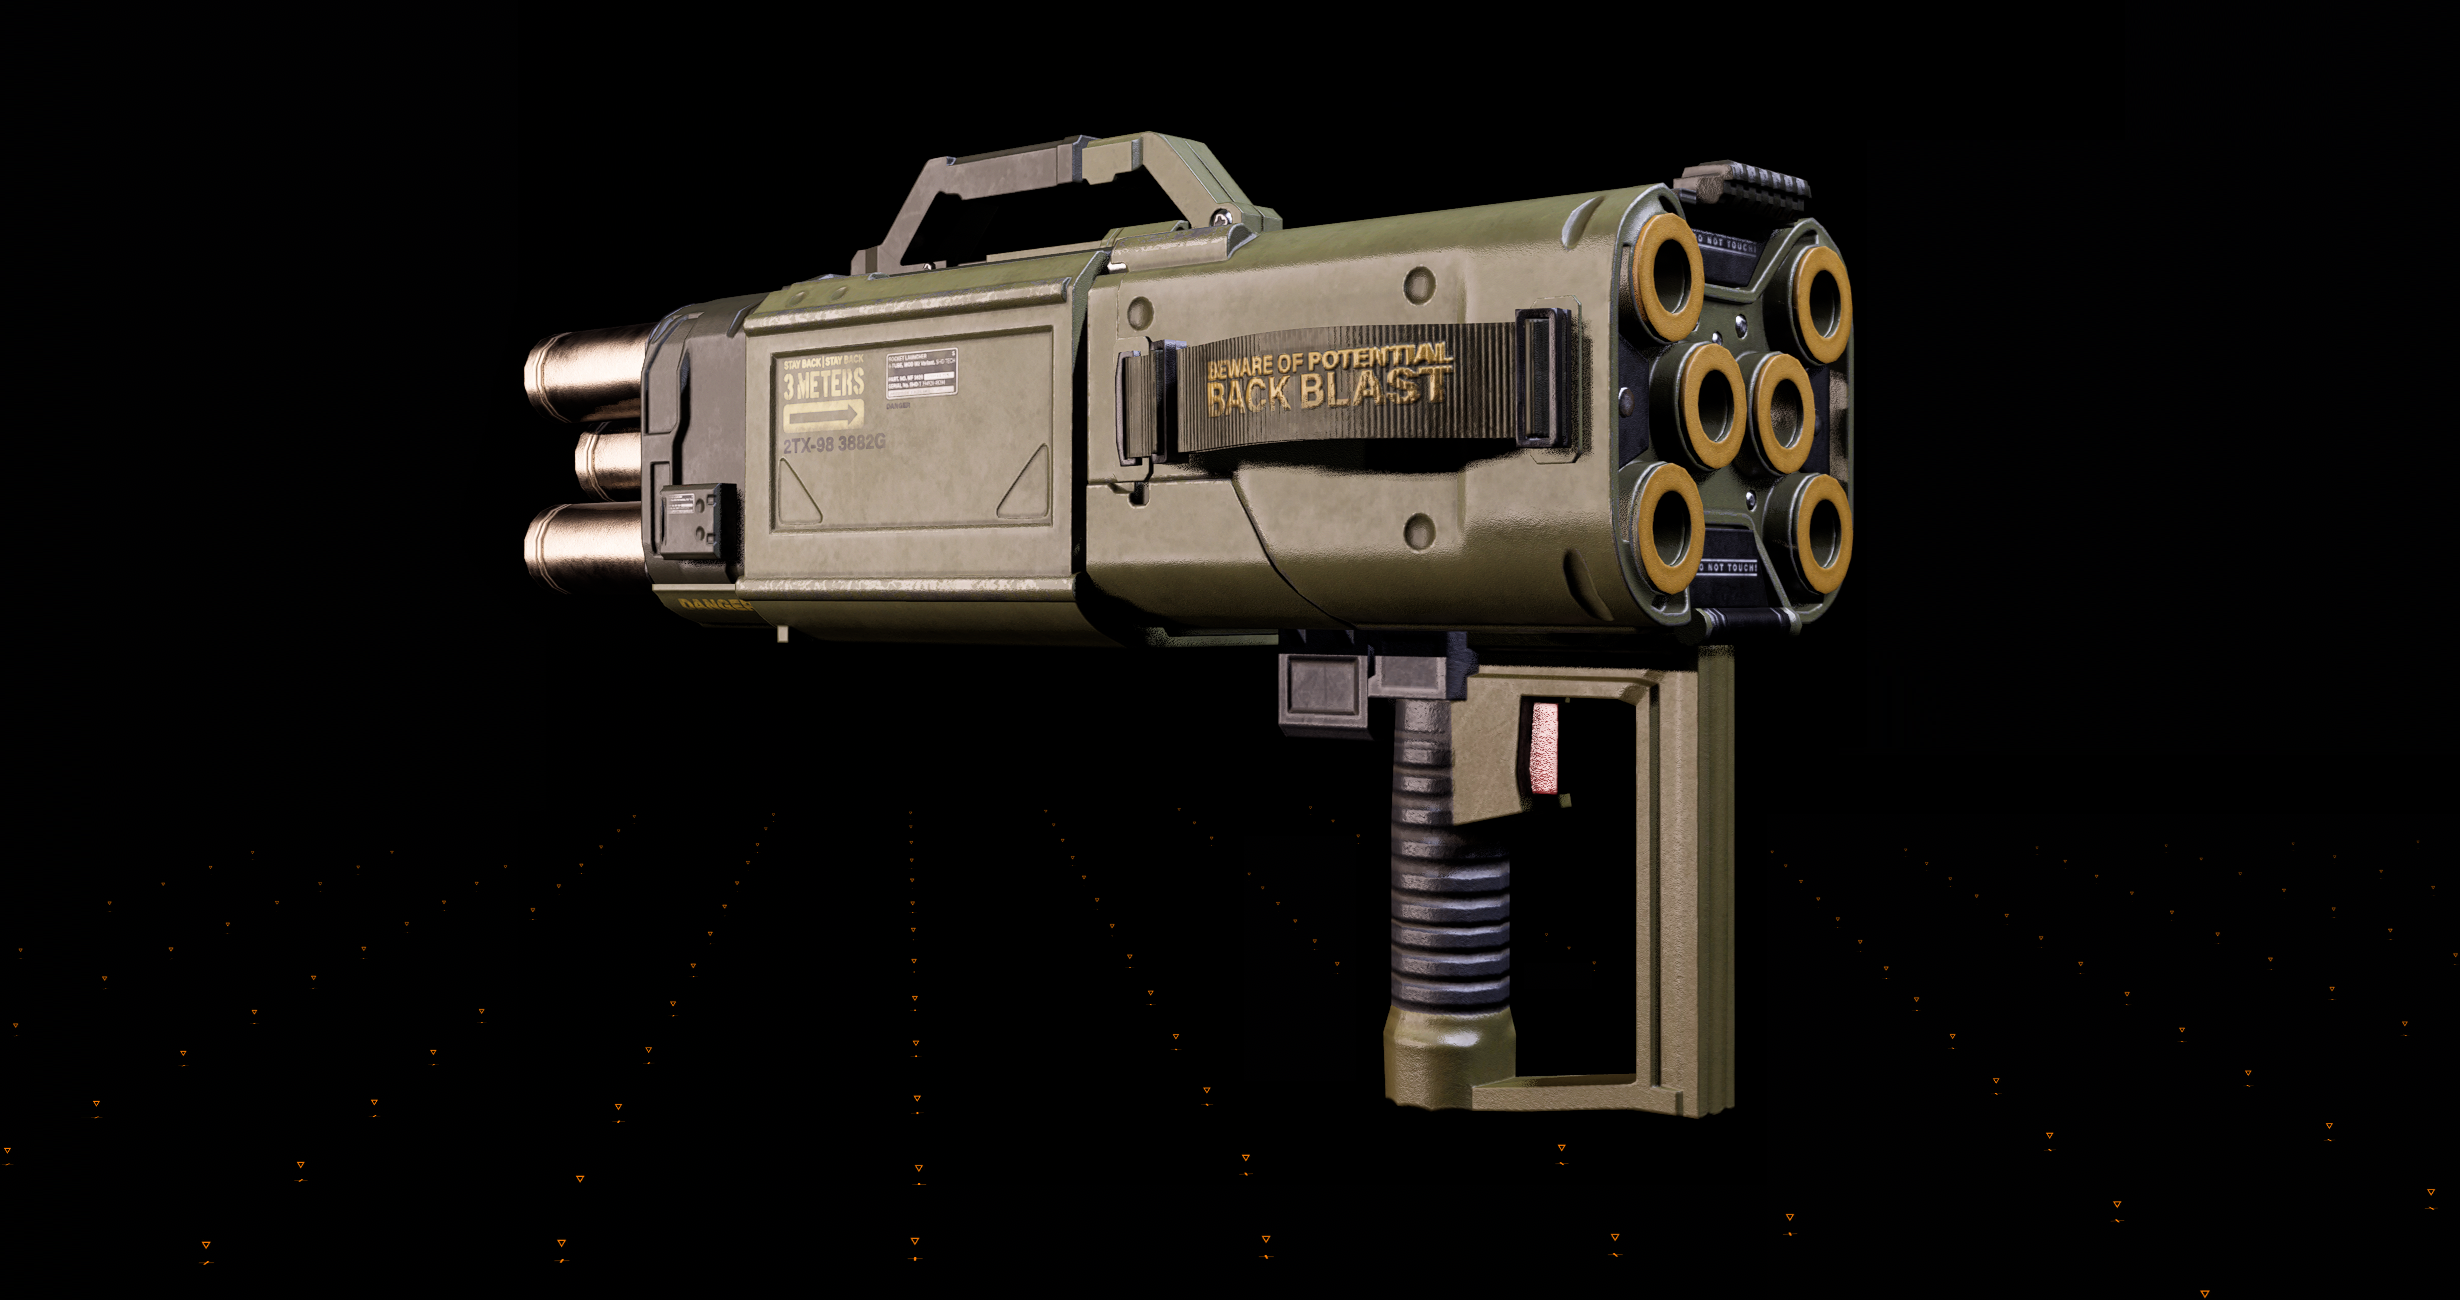 P-017 Missile Launcher, The Division Wiki